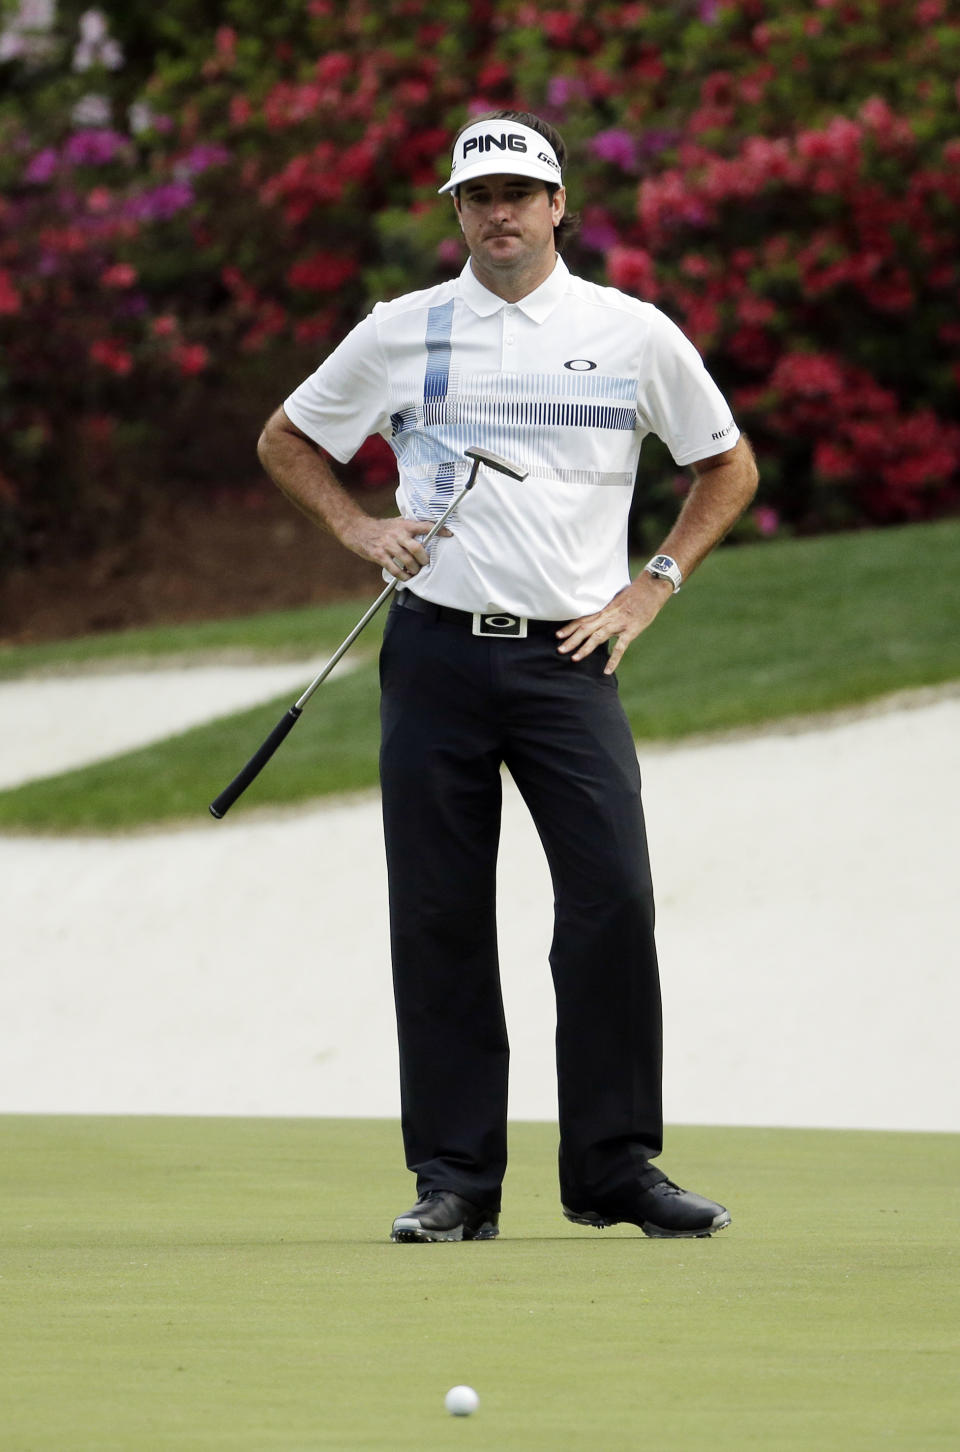 Bubba Watson looks at his ball after missing an eagle putt on the 13th green during the fourth round of the Masters golf tournament Sunday, April 13, 2014, in Augusta, Ga. (AP Photo/Chris Carlson)